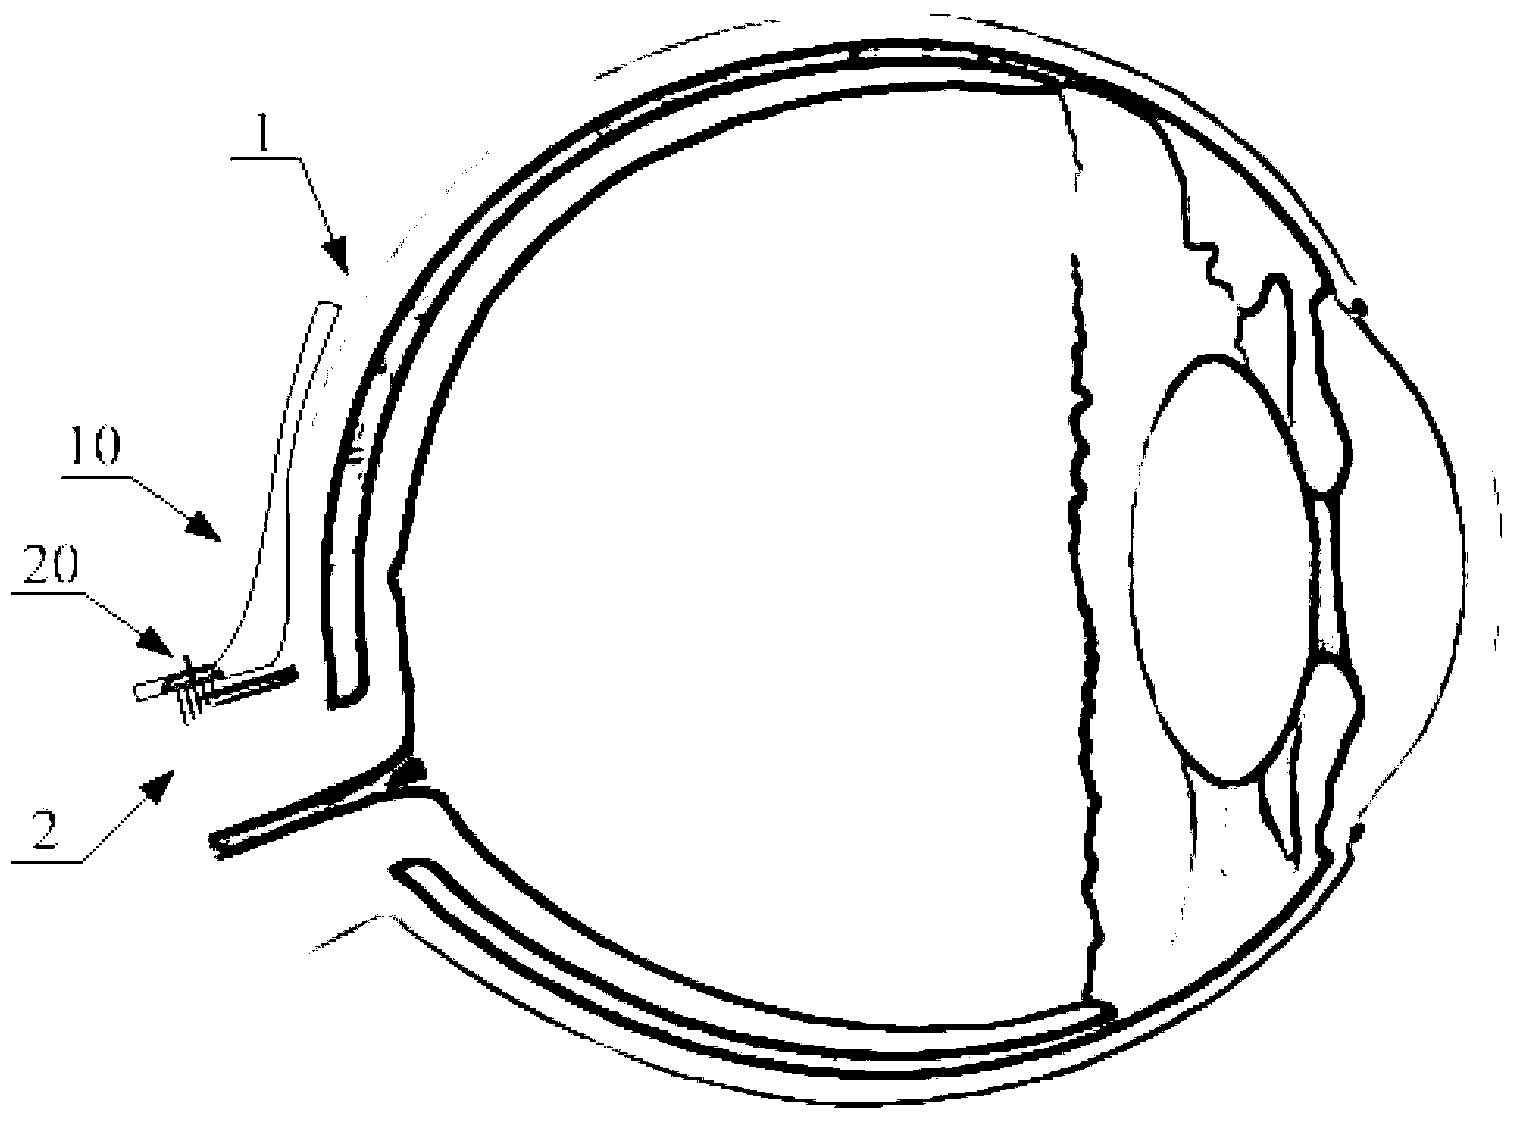 Optic nerve implantable neural interface device with fan-shaped attaching function